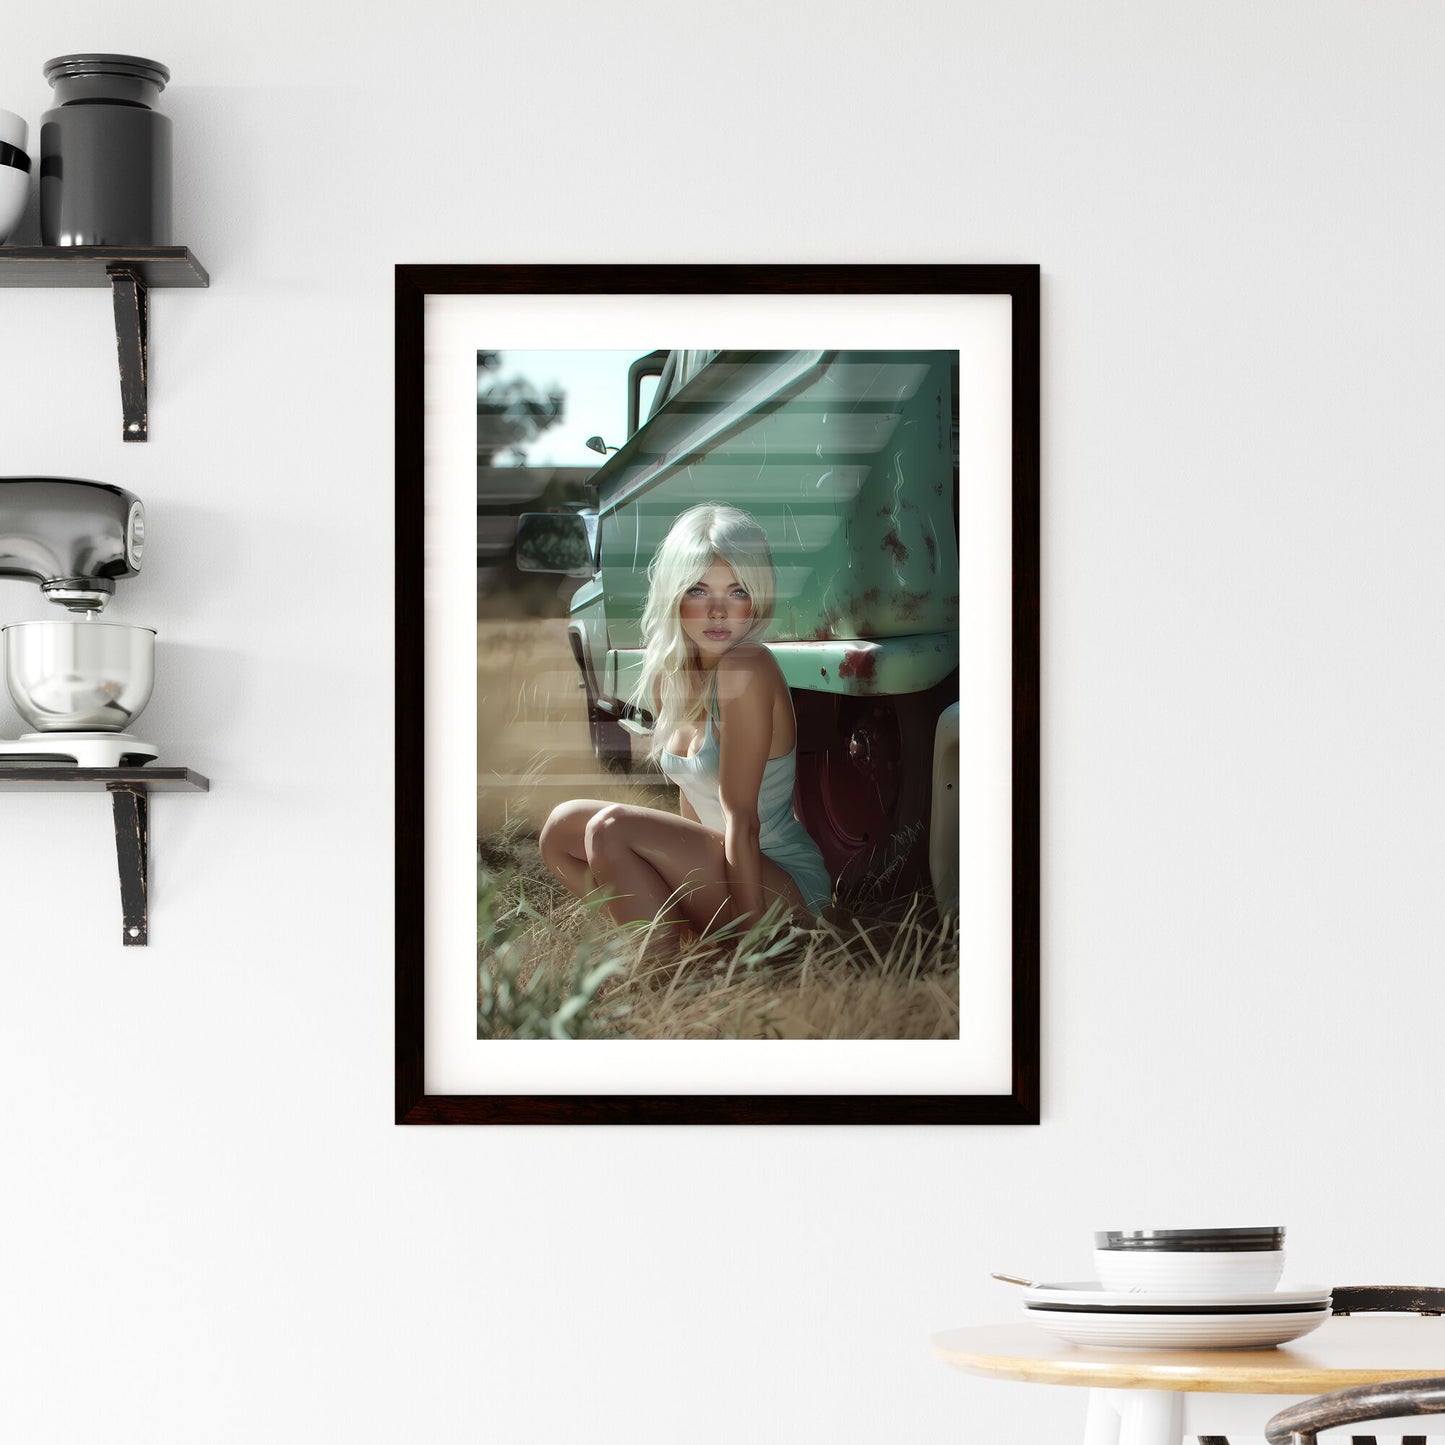 Sitting pin up factory worker girl,looking amazing - Art print of a woman sitting in a field next to a green truck Default Title